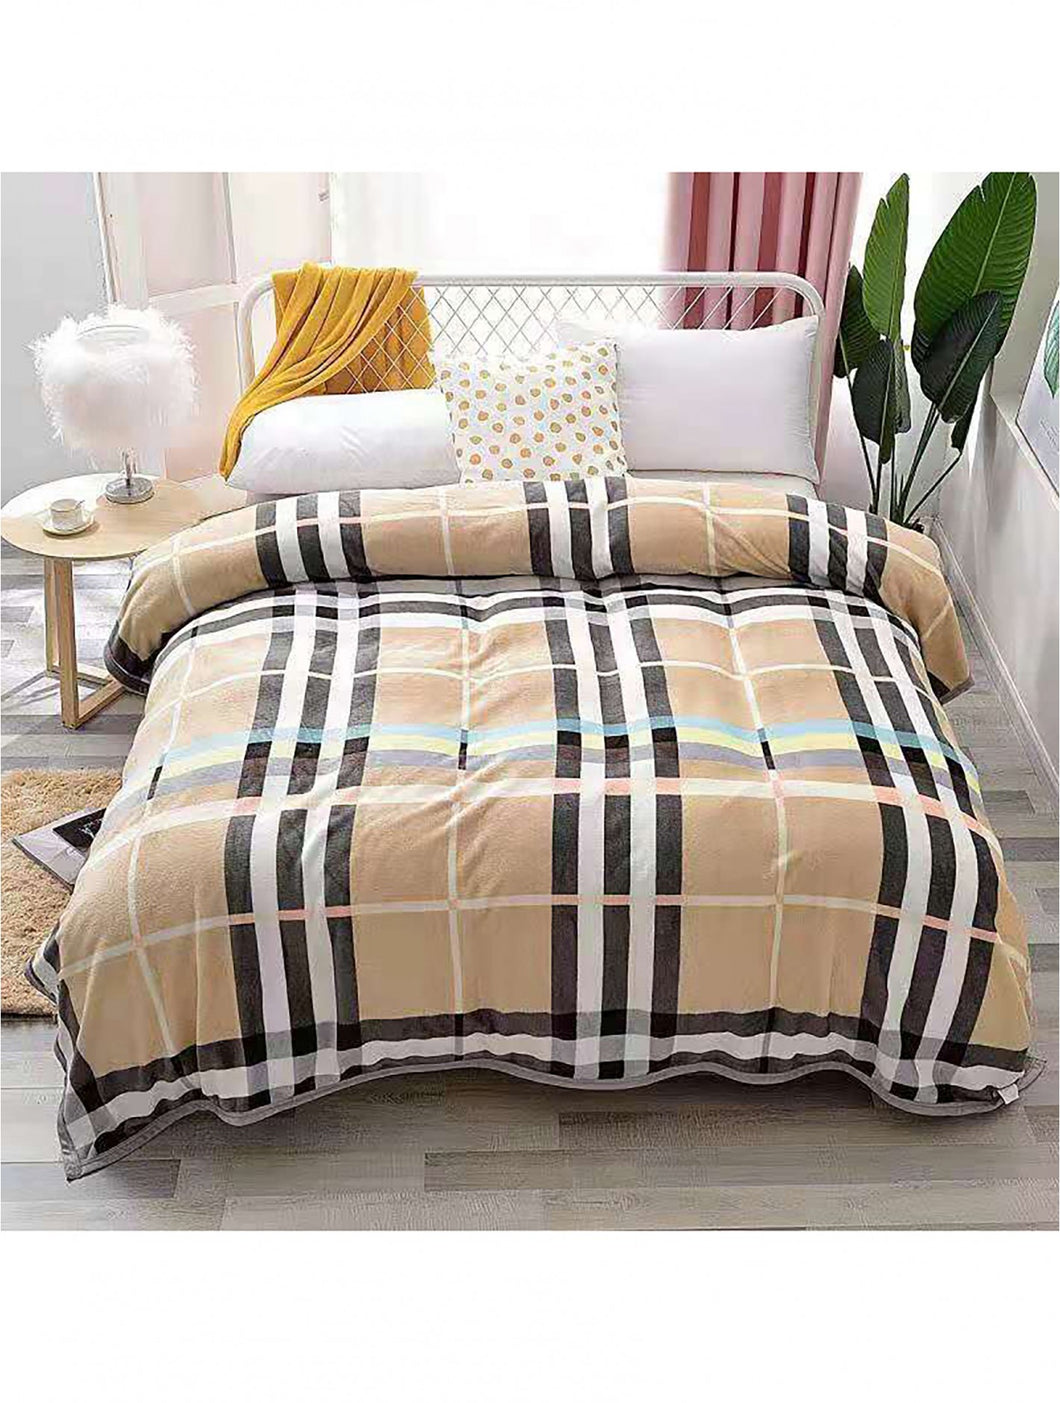 Embroidered Microfiber Soft Printed Flannel Blanket (with gift packaging) - Brown, Black, White Striped